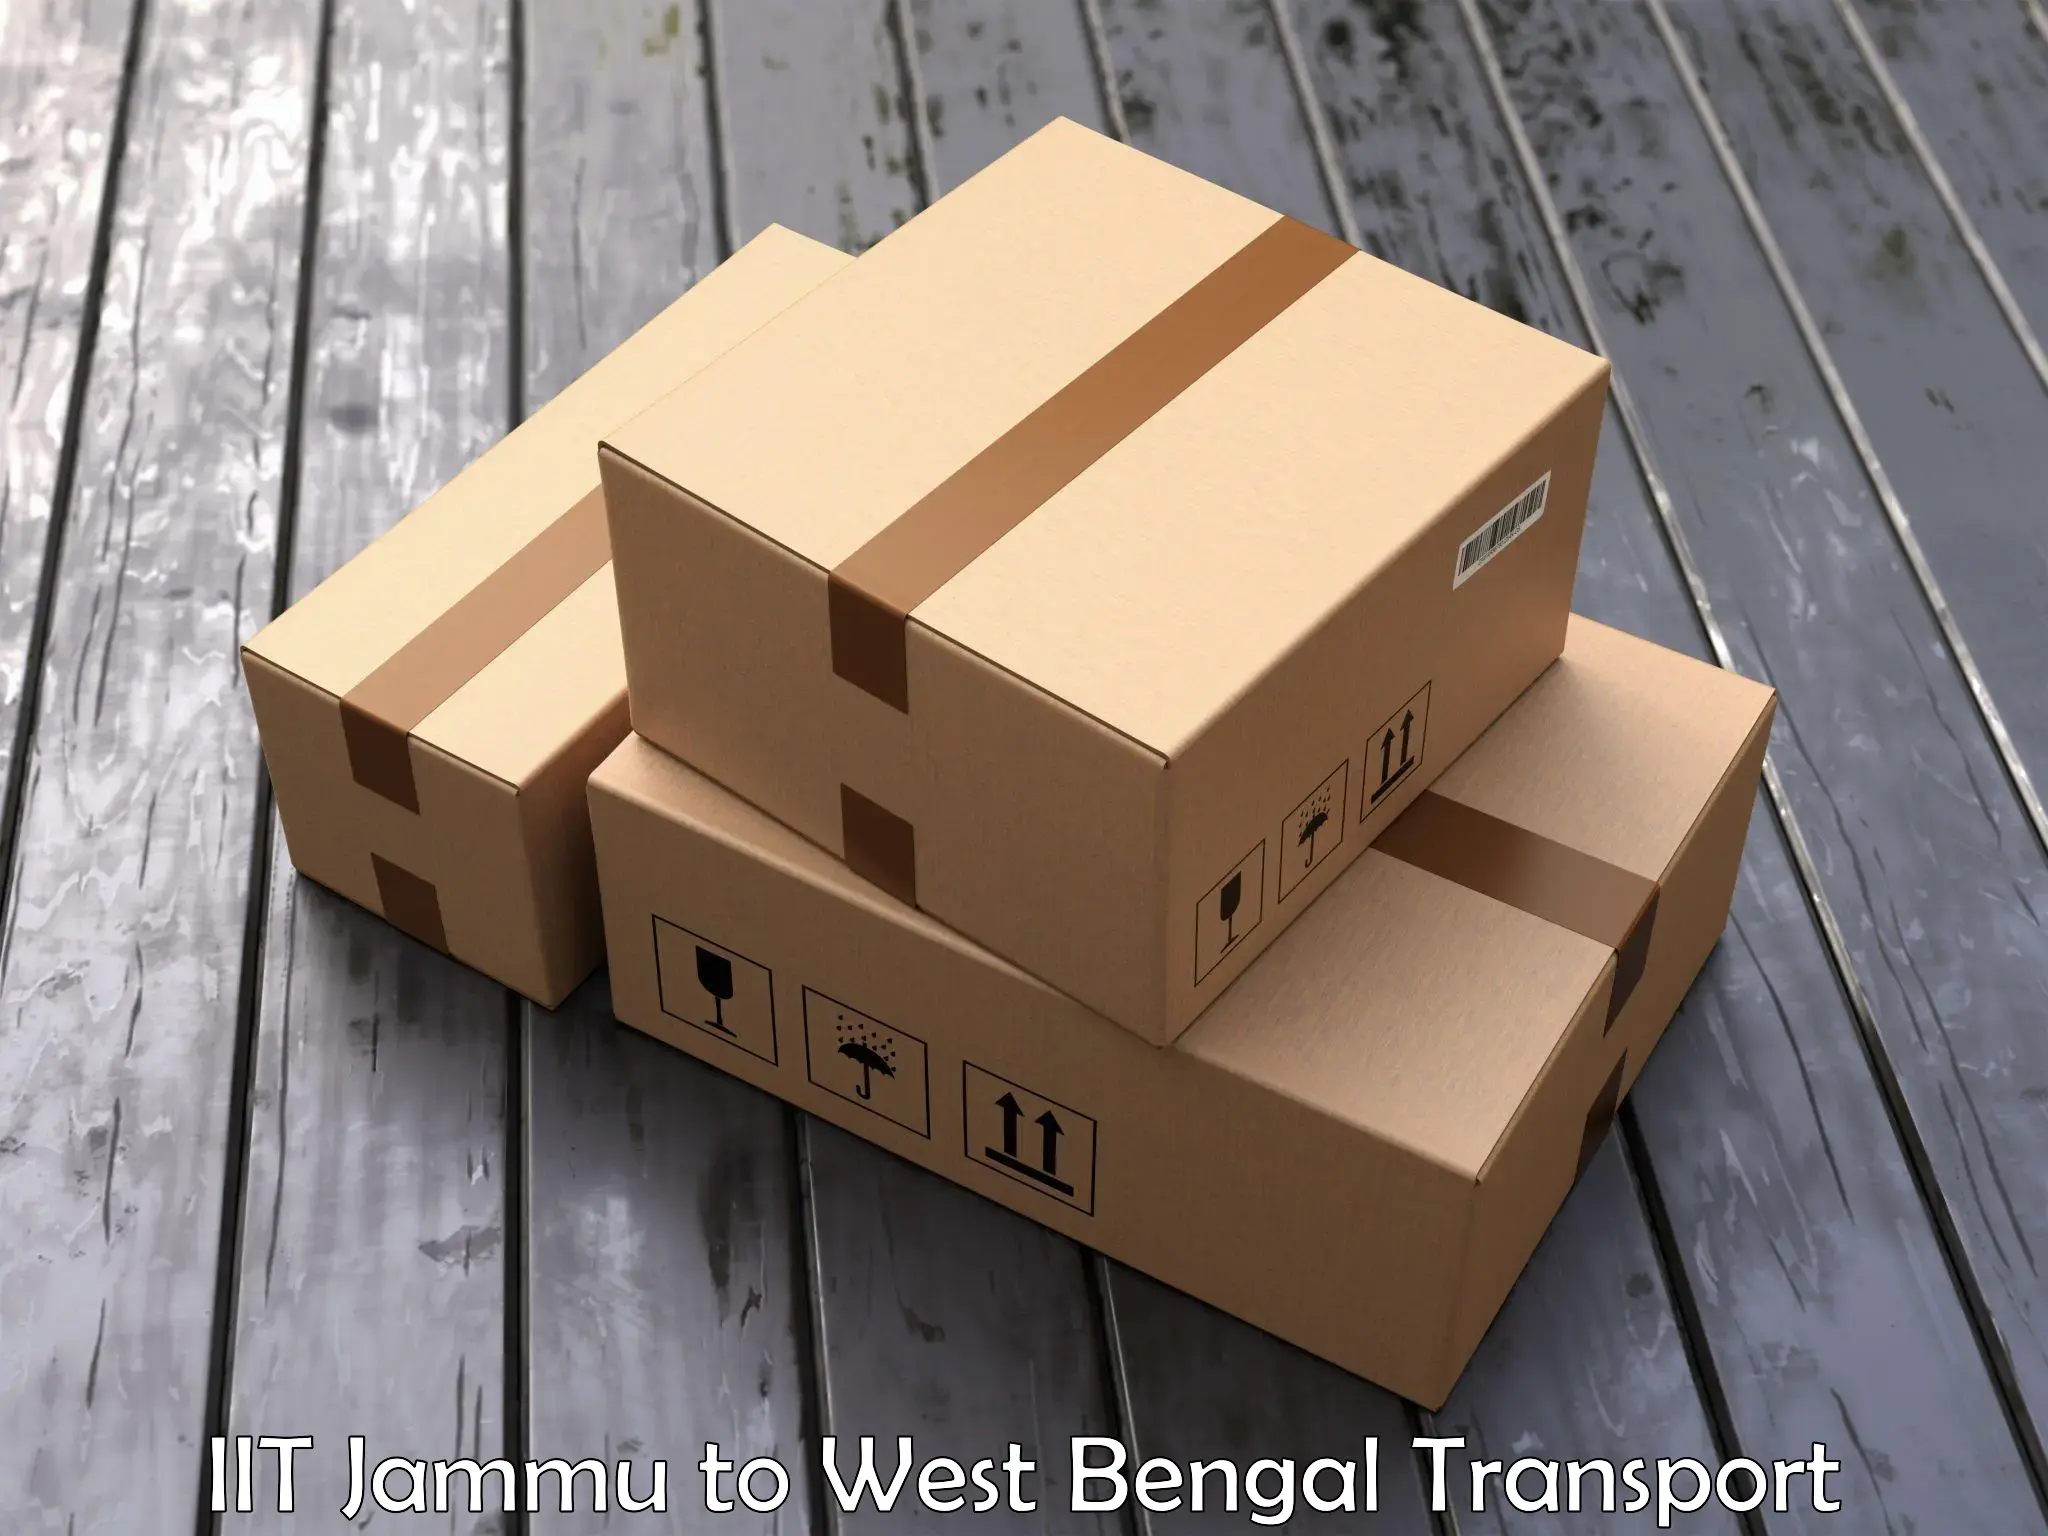 Container transport service IIT Jammu to Chhatna